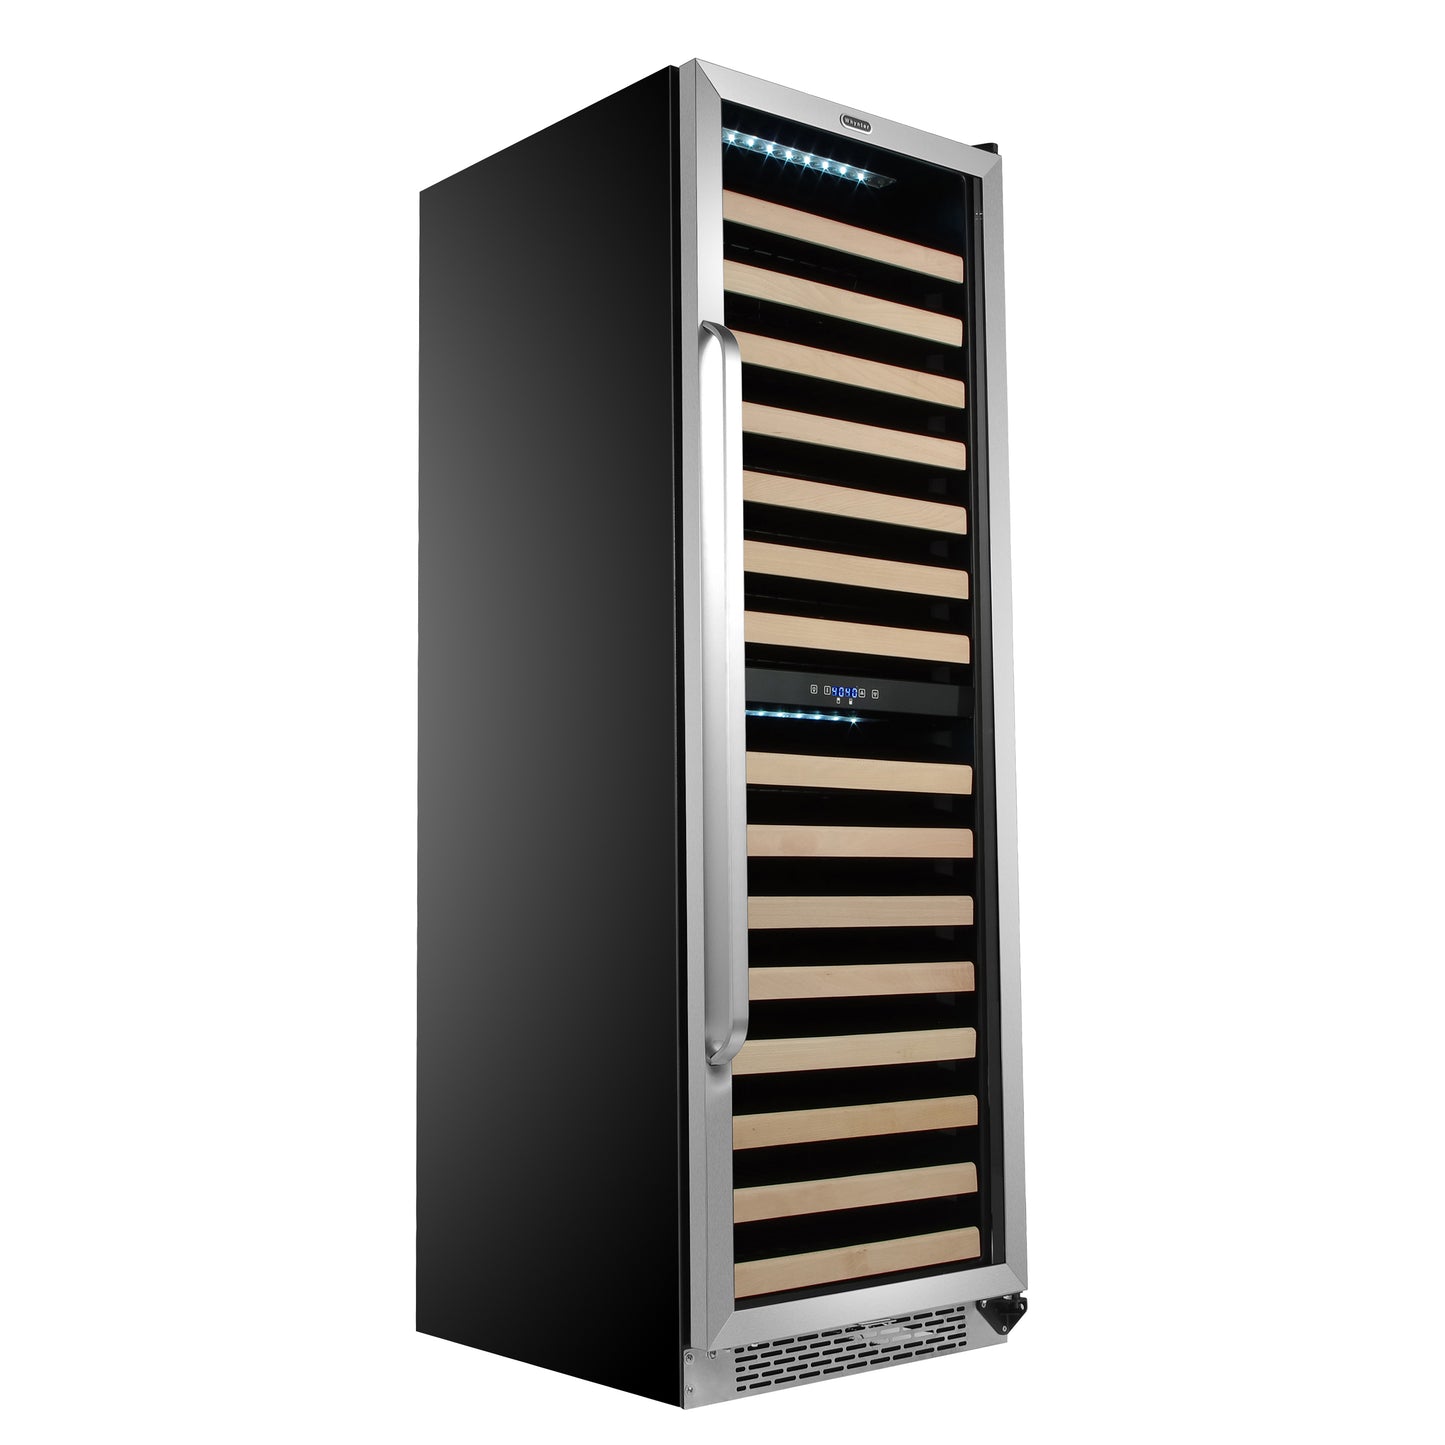 a black and silver wine cooler with wood shelves and a digital display